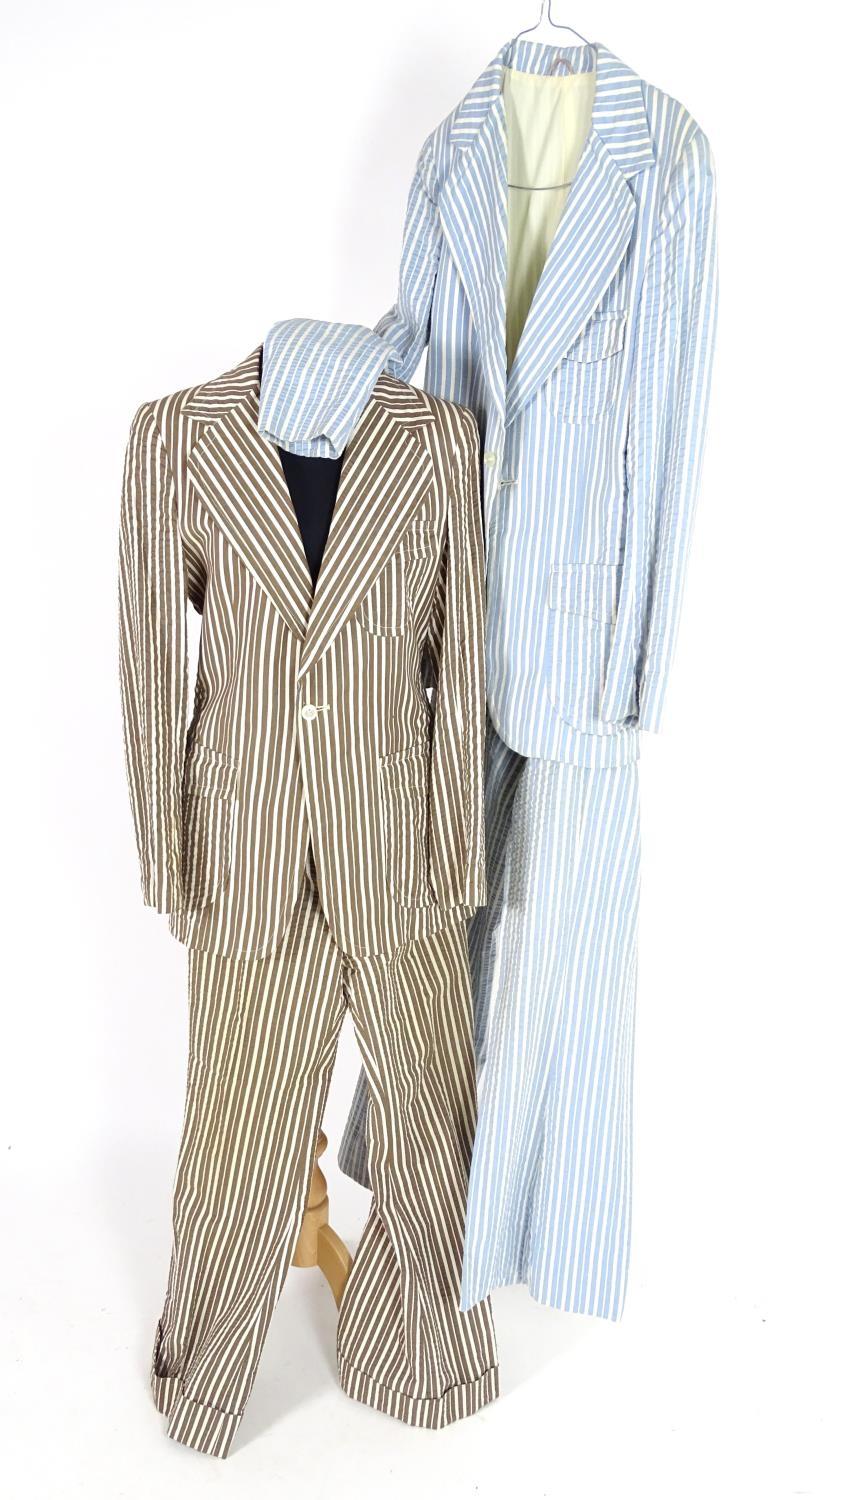 2 vintage stripy suits by Austins, a light brown and cream striped jacket and trousers along with - Image 5 of 10